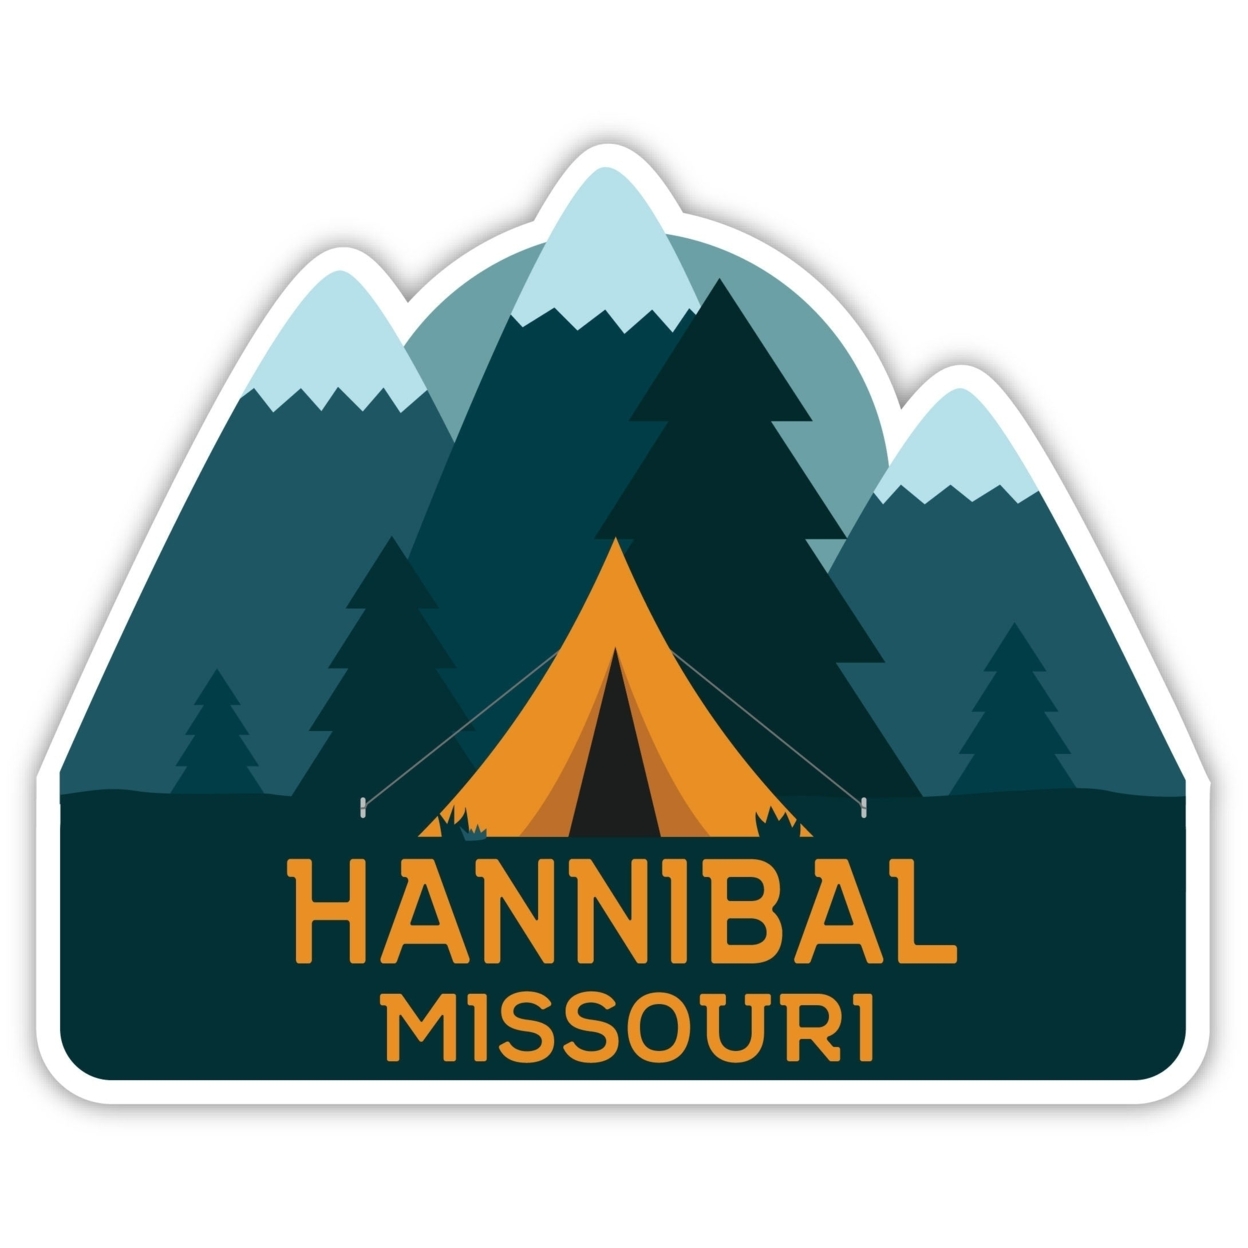 Hannibal Missouri Souvenir Decorative Stickers (Choose Theme And Size) - 4-Pack, 8-Inch, Camp Life